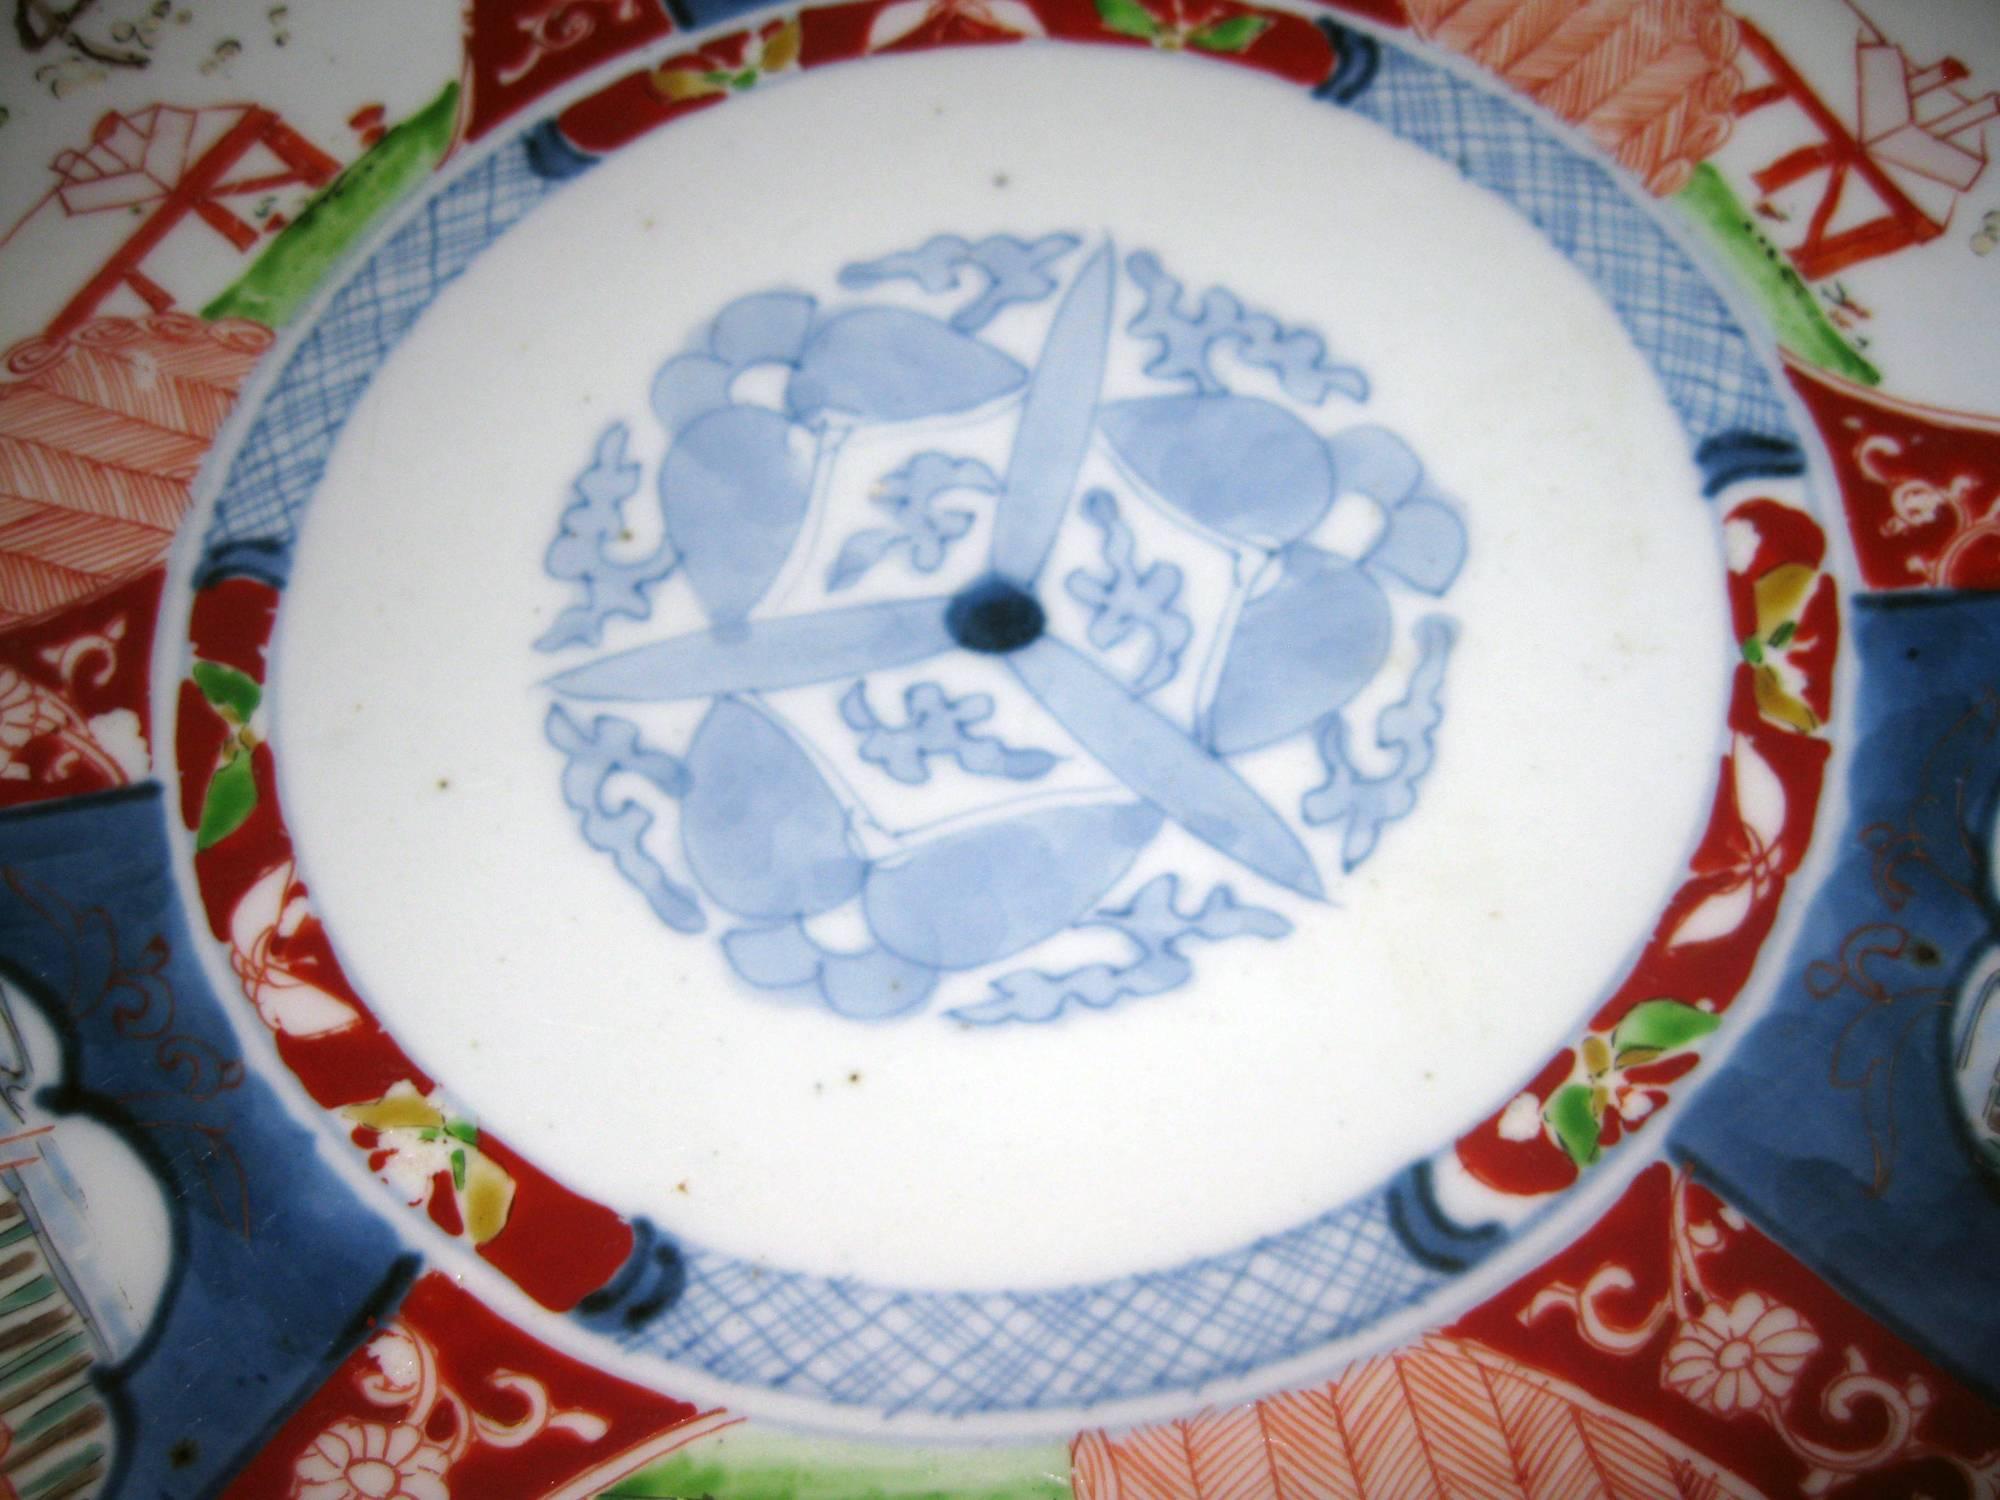 Petite Imari charger featuring a center medallion with butterflies. The edges are painted with intricate geometric, floral and bird motifs in lovely pale colors. Designs painted on back of charger as well.